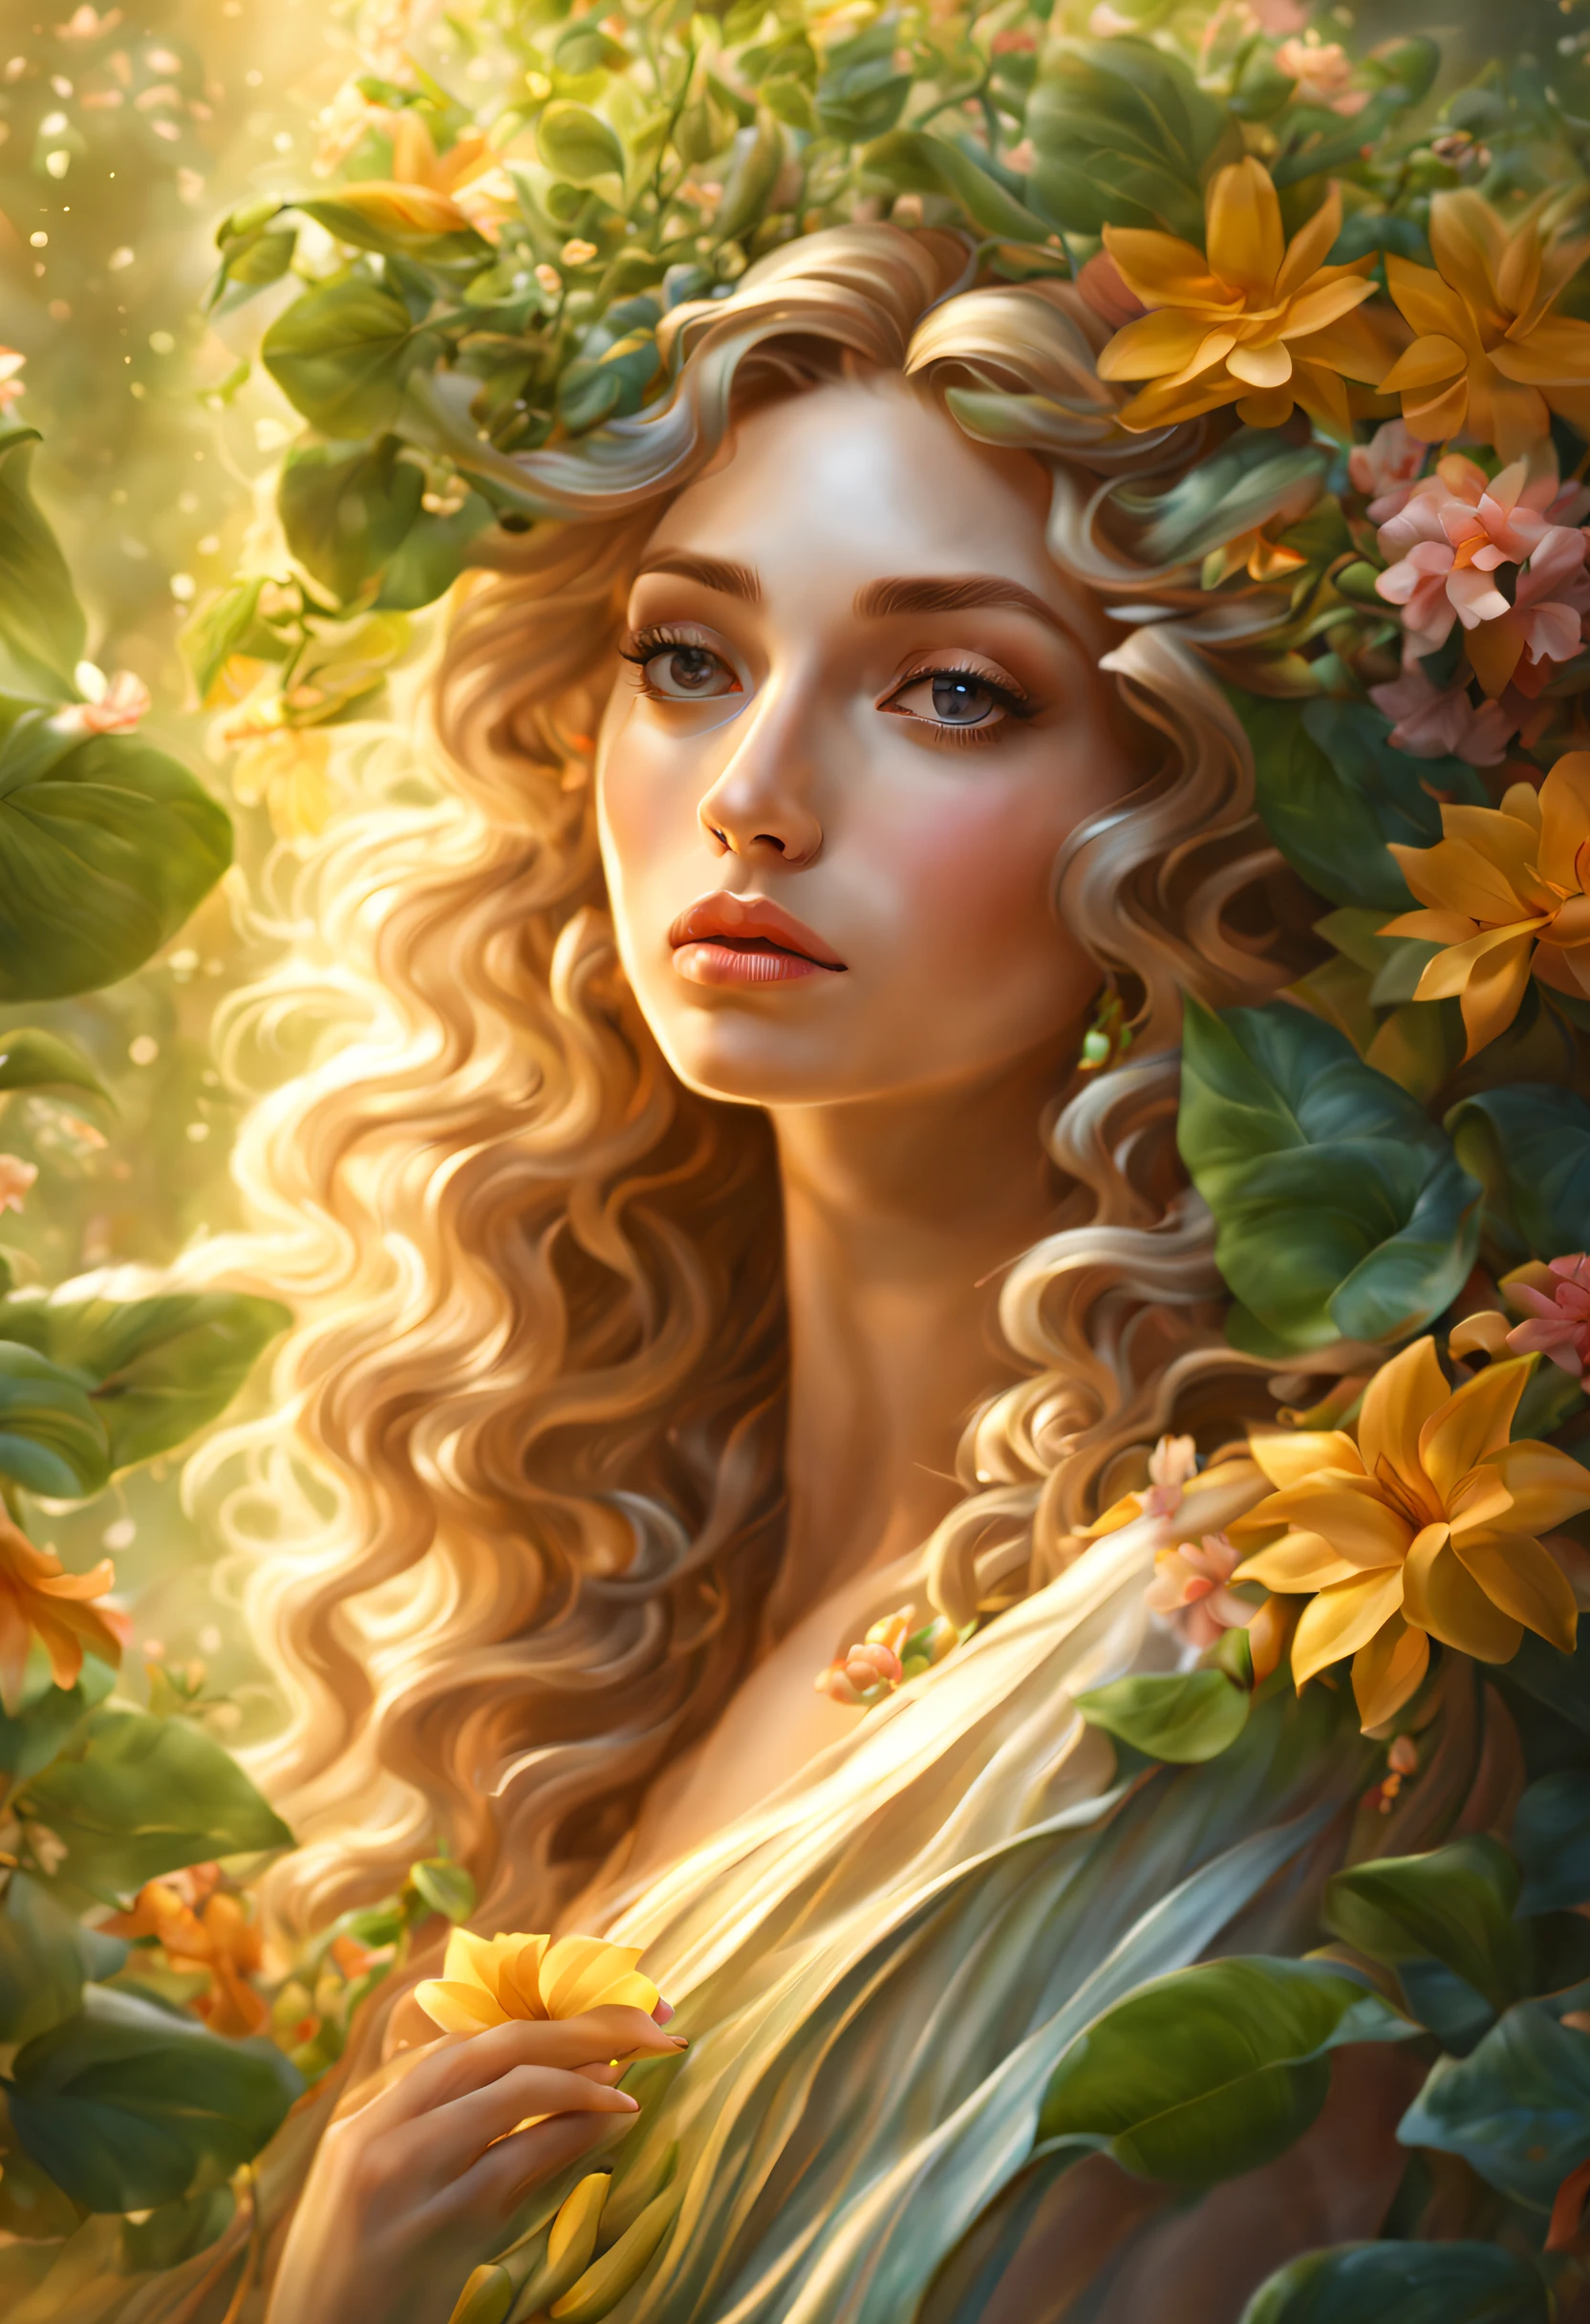 (best quality,4k,8k,highres,masterpiece:1.2),ultra-detailed,(realistic,photorealistic,photo-realistic:1.37),The goddess of plants,greenery intertwined with the elegant features of a woman,beautiful detailed eyes,beautiful detailed lips,a woman with an ethereal glow,graceful and serene expression,flowing hair adorned with delicate flowers,lush garden with a variety of vibrant plant life,golden rays of sunlight filtering through the leaves,enveloping the scene in a warm and magical light,fine brush strokes capturing every intricate detail,subtle textures emphasizing the delicate petals and leaves,deep and vivid colors,translucent and dewy petals,leaves dancing with a gentle breeze,an aura of tranquility and life,harmony between nature and the divine,a mesmerizing and otherworldly portrait,portraits,botanical,art nouveau,colorful palette,soft and dreamy lighting